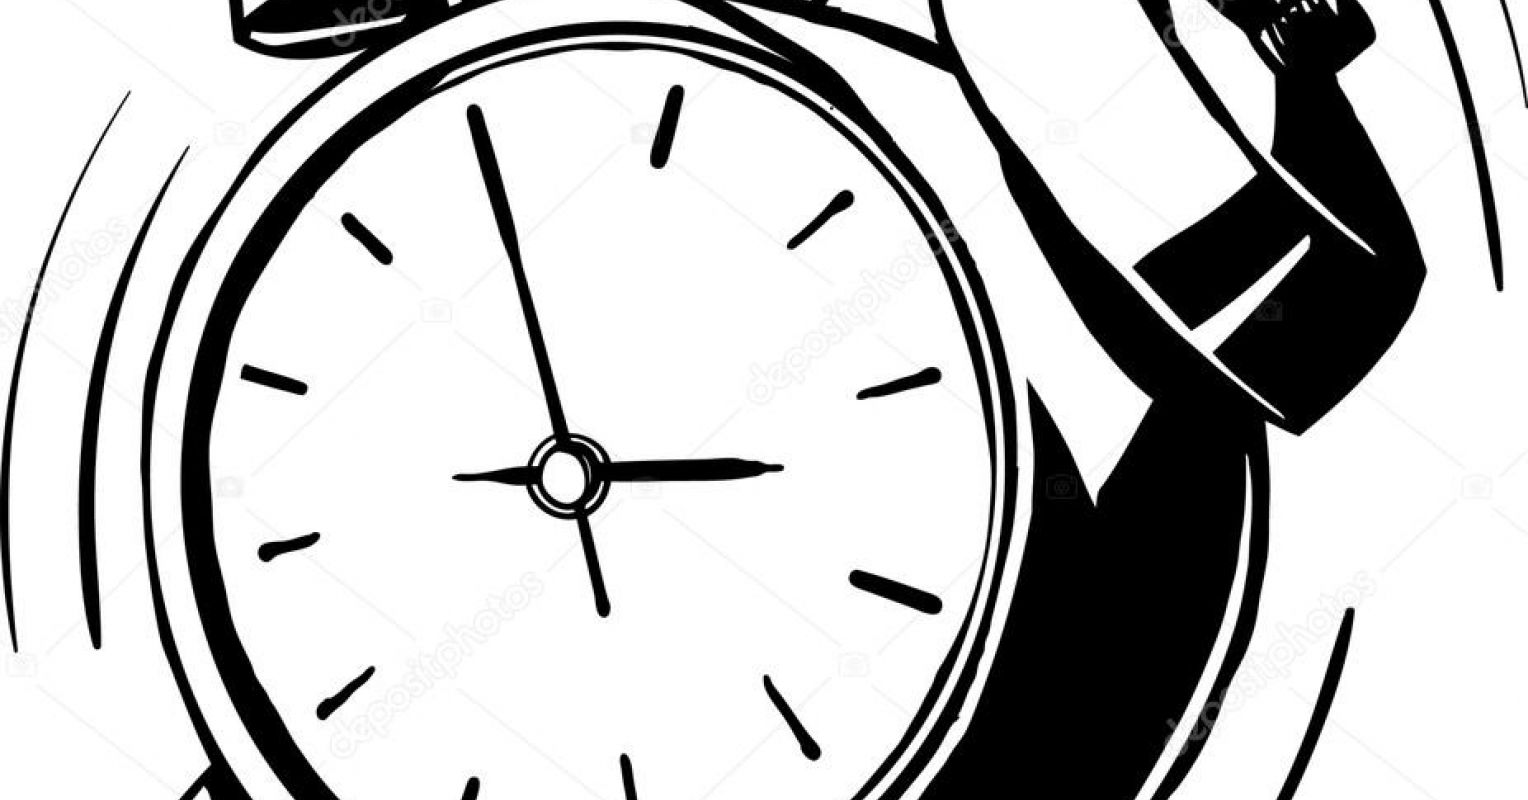 Is Time Speeding Up? Psychology Today